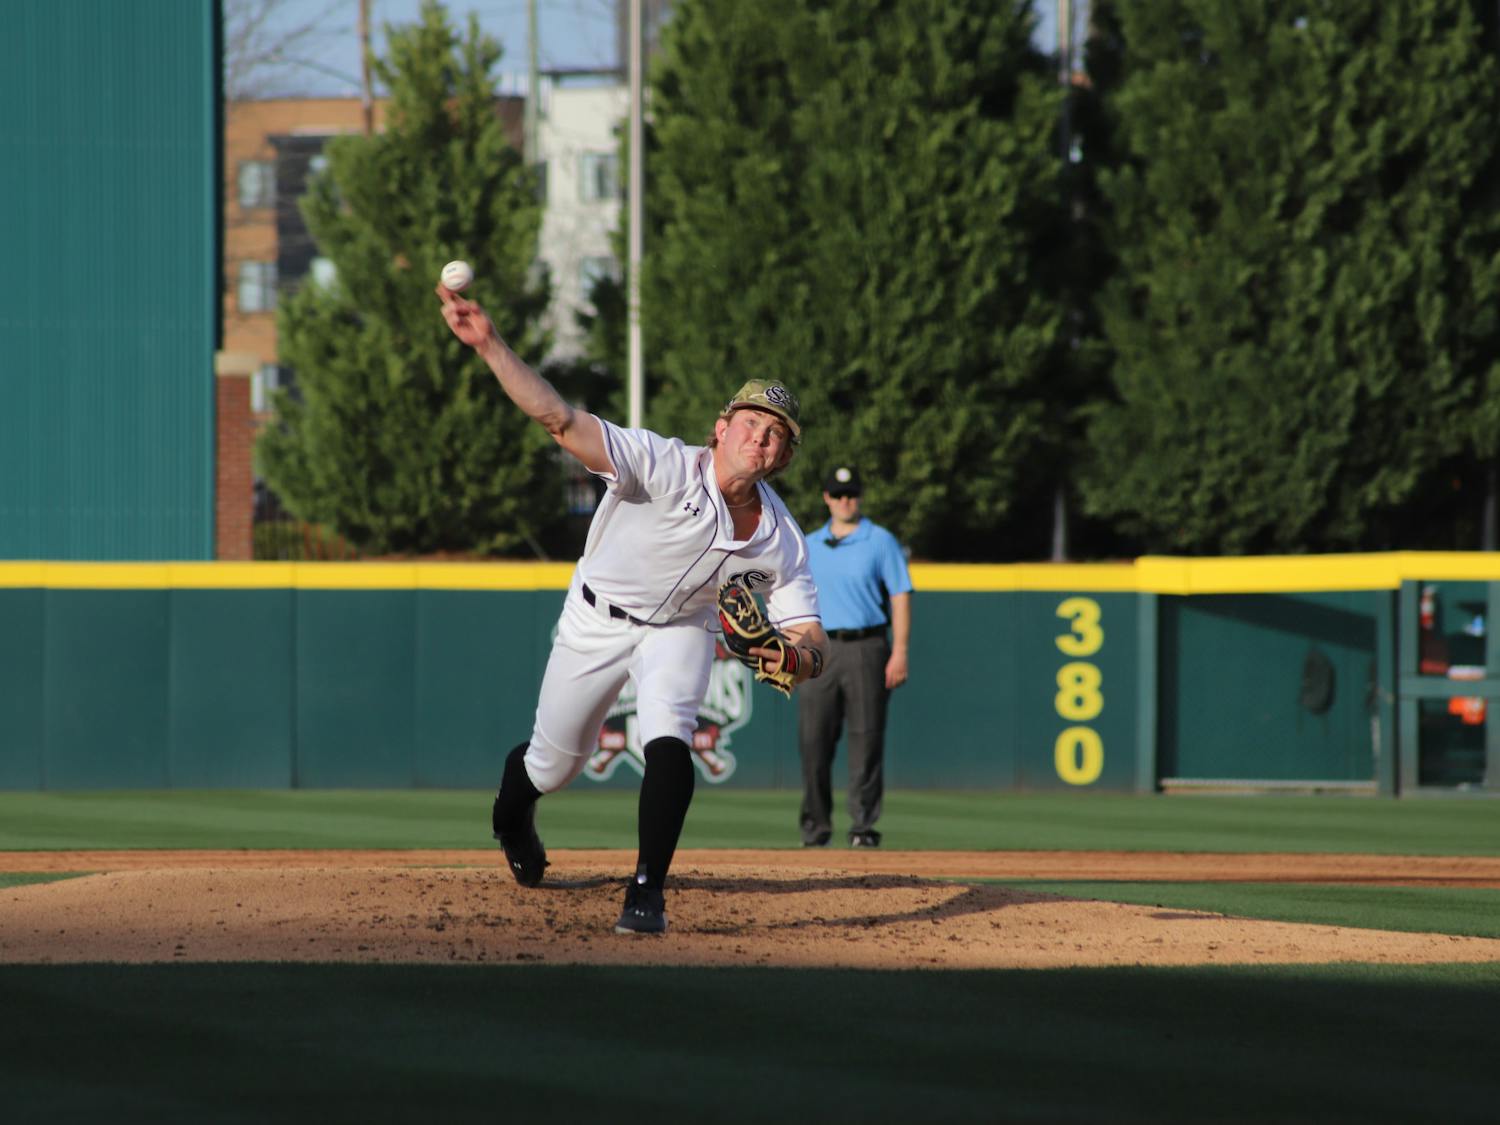 Sophomore pitcher Eli Jones pitching for South Carolina in the game against North Carolina A&amp;T at Founders Park on Feb. 28, 2023. The Gamecocks beat the Aggies 11-3 for its ninth consecutive win of the 2023 season.